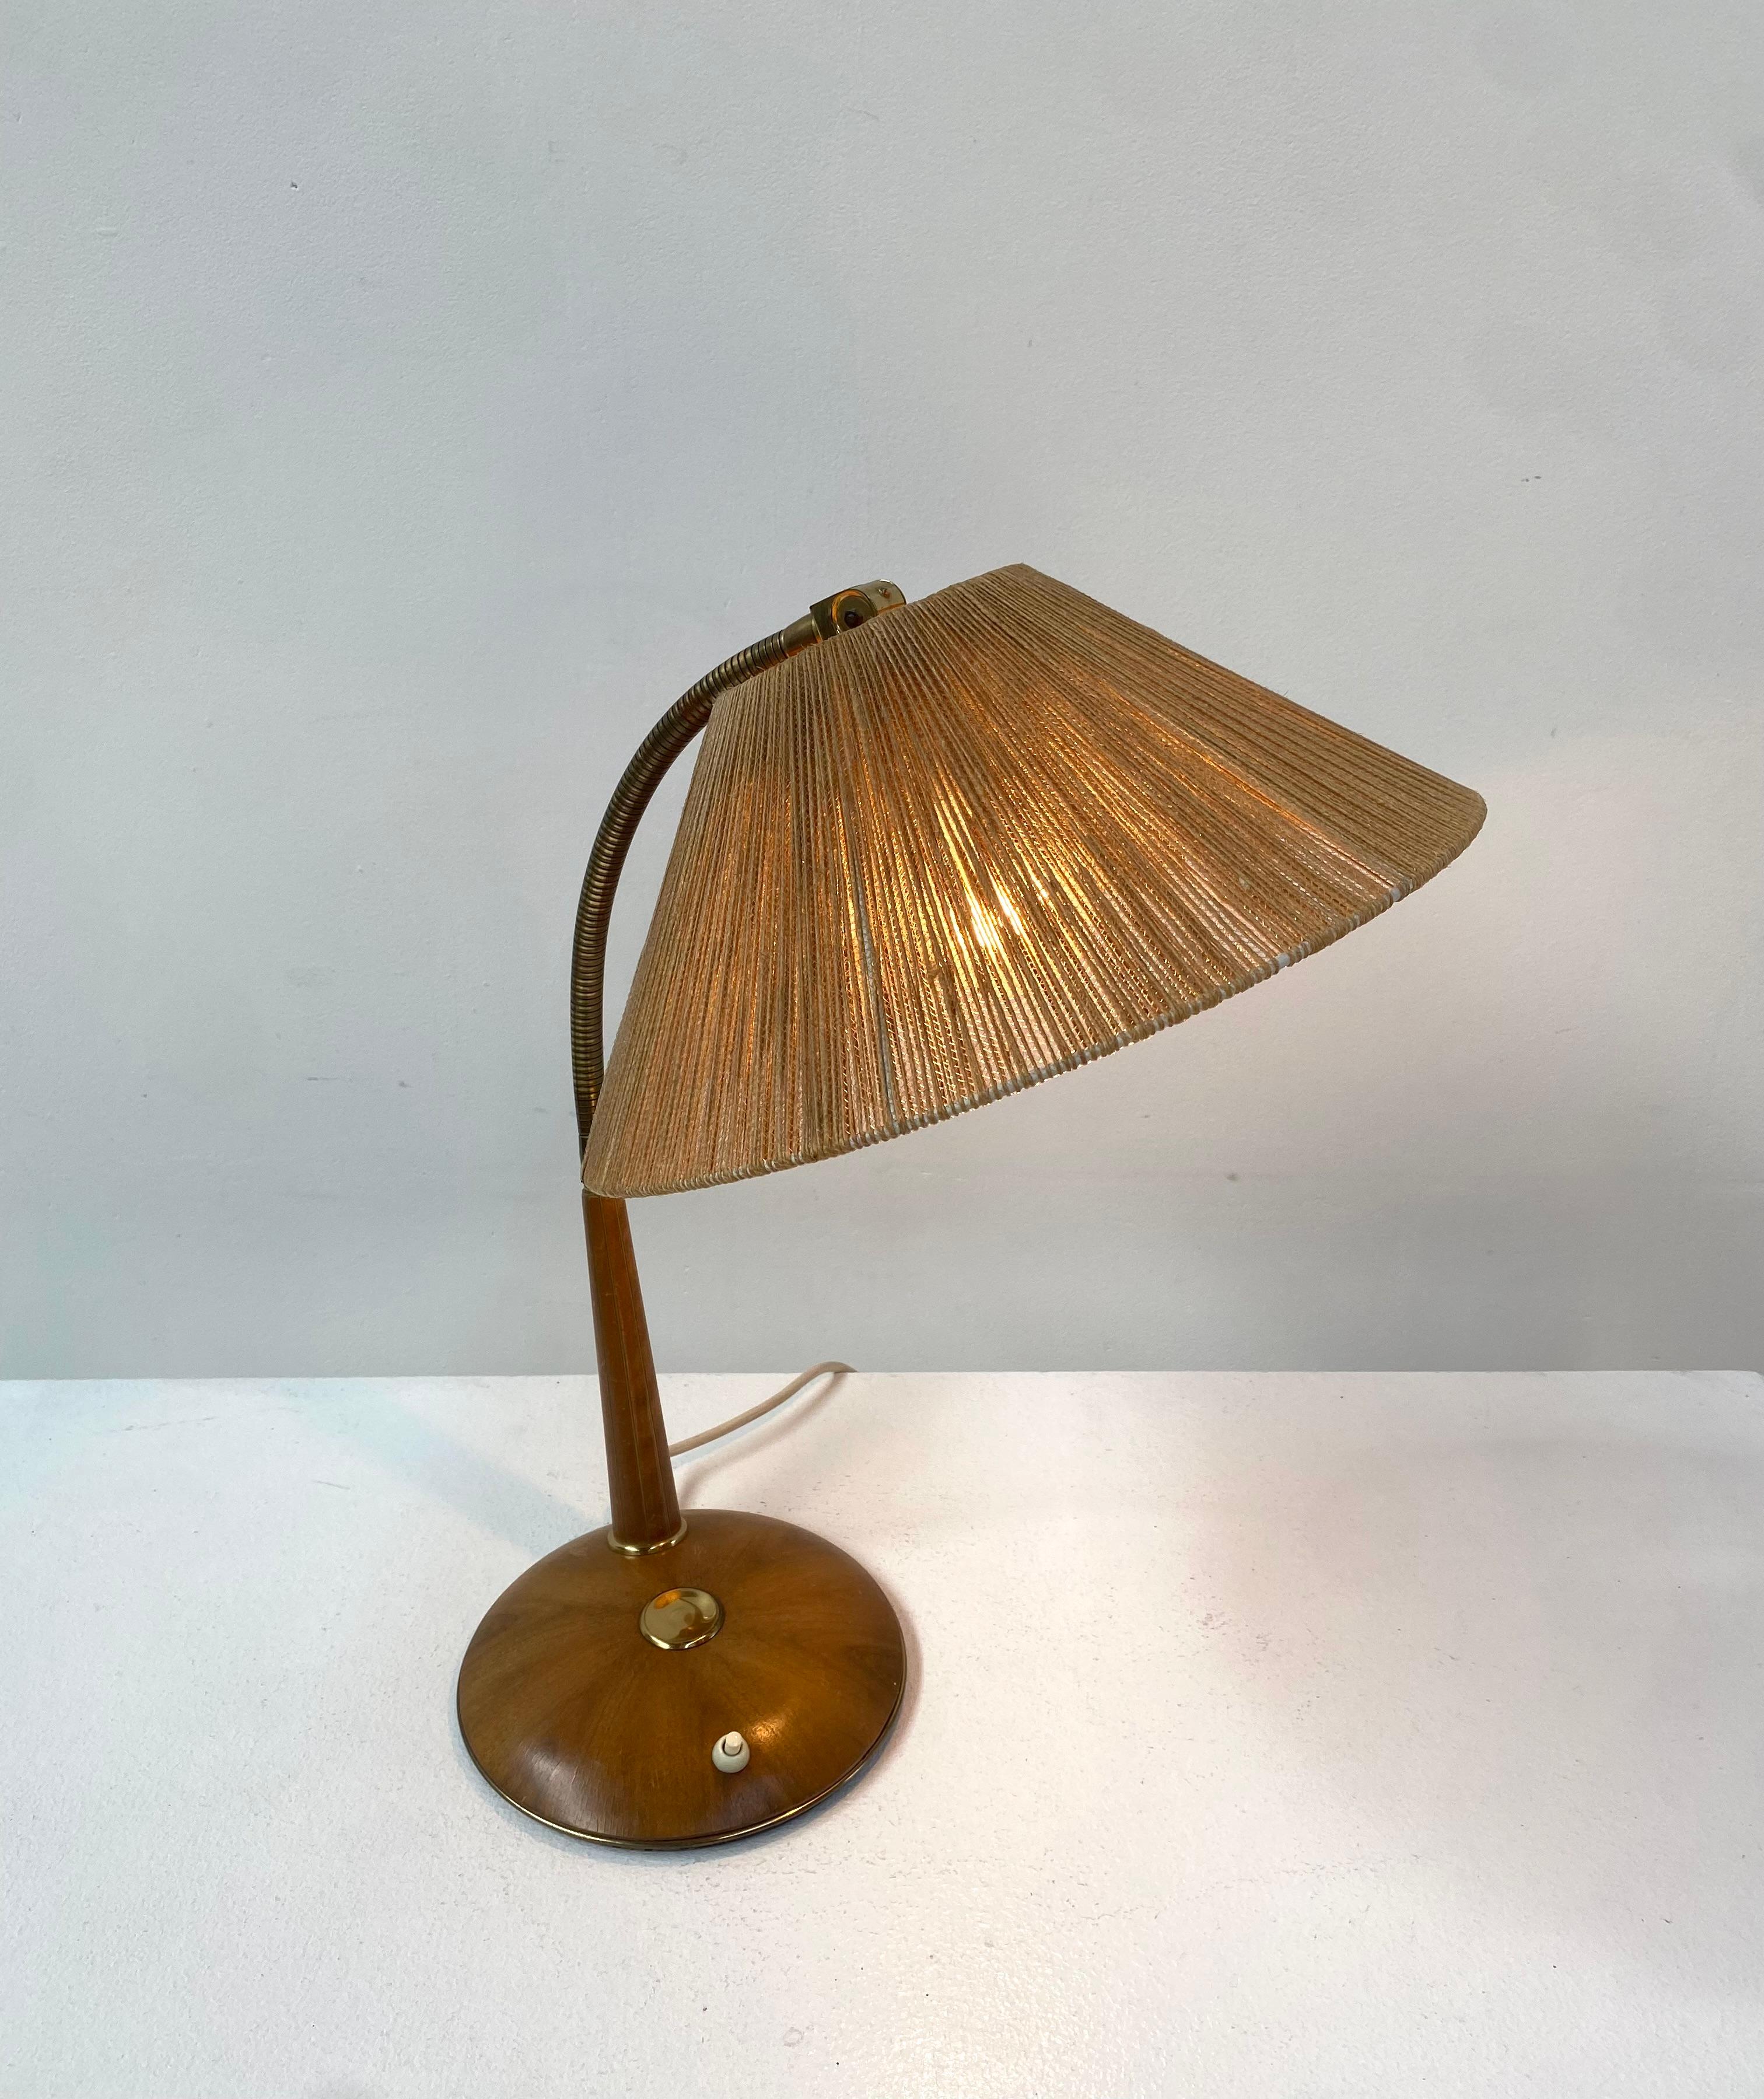 Late 20th Century Swiss Teak Table Lamp,  Mod. 2655,  by Frits Muller for Temde Leuchten, 1970s. For Sale